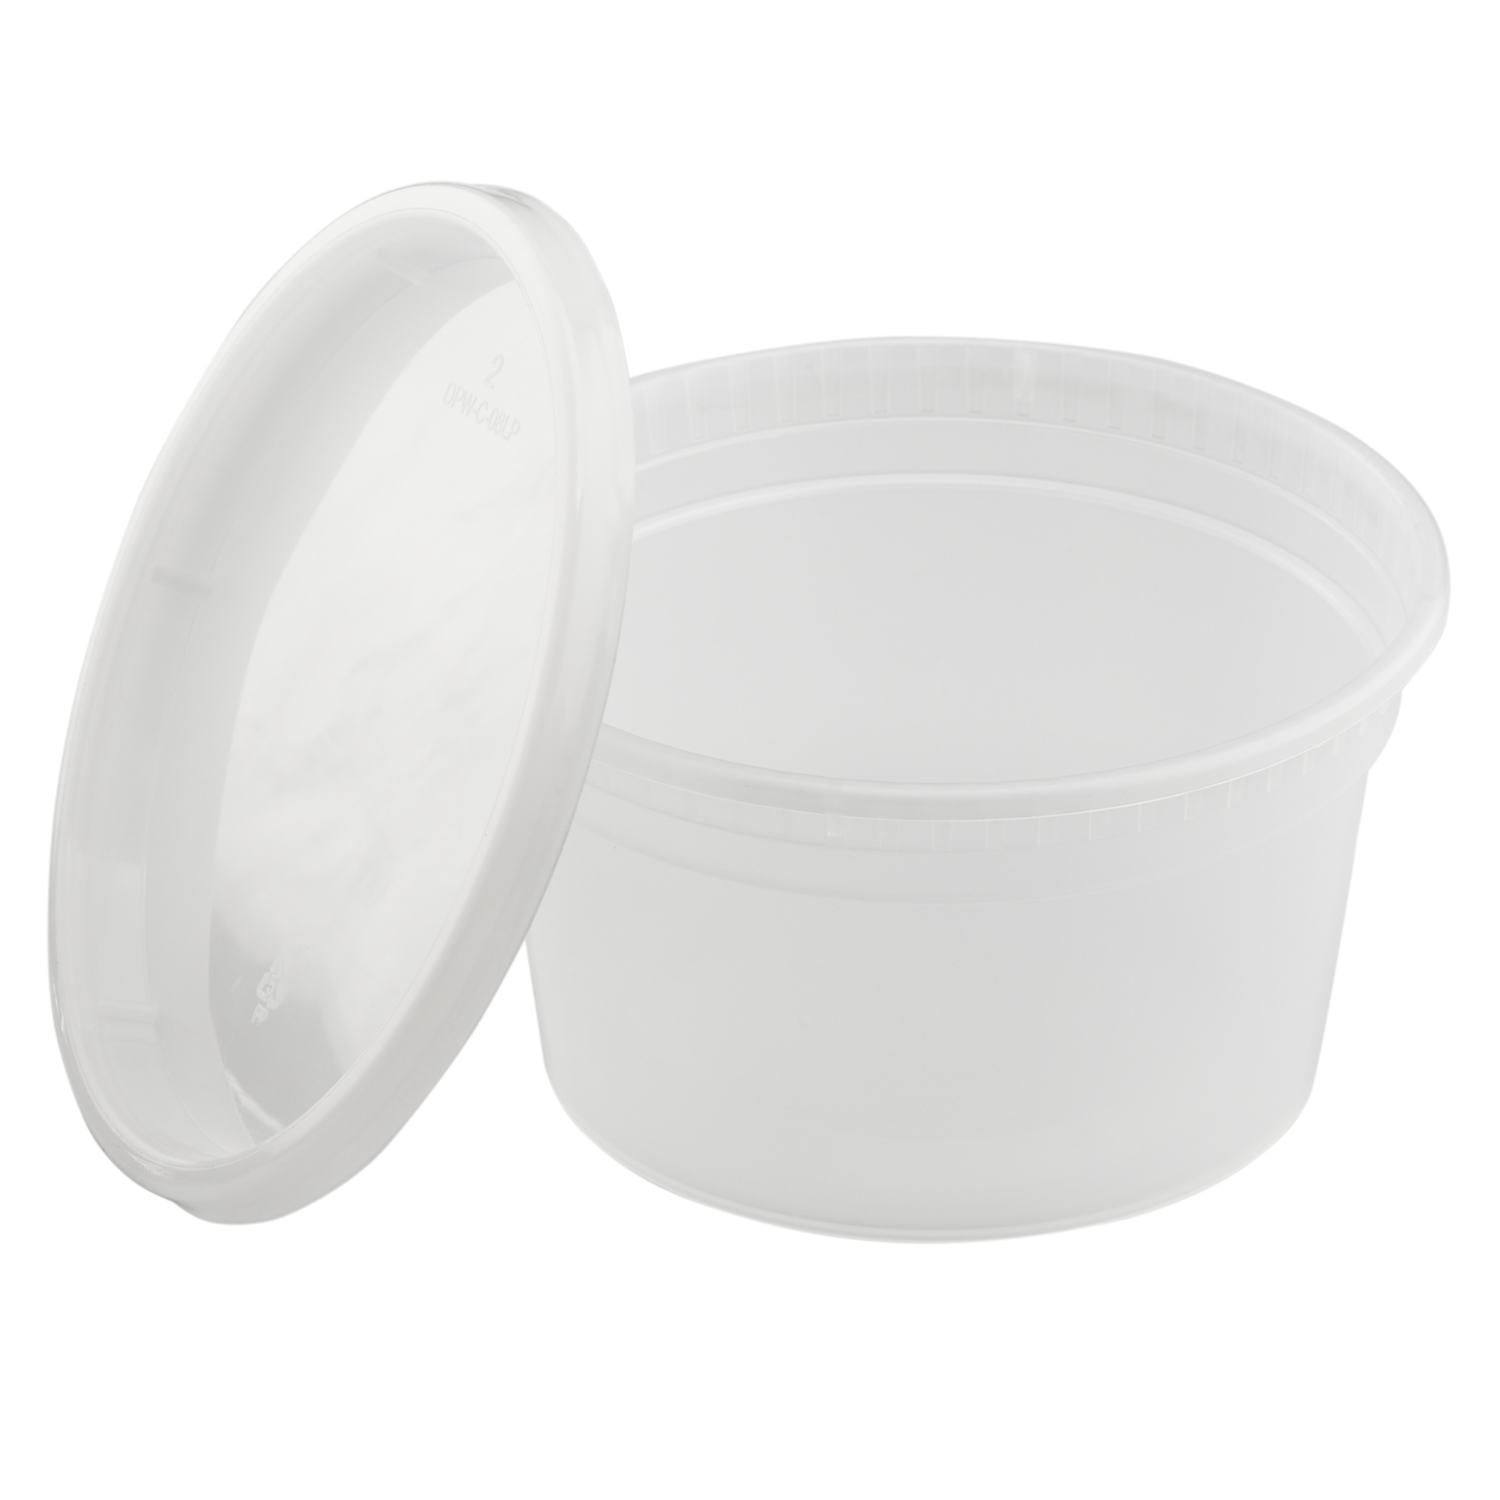 Heavy duty deli containers with lids 8Oz